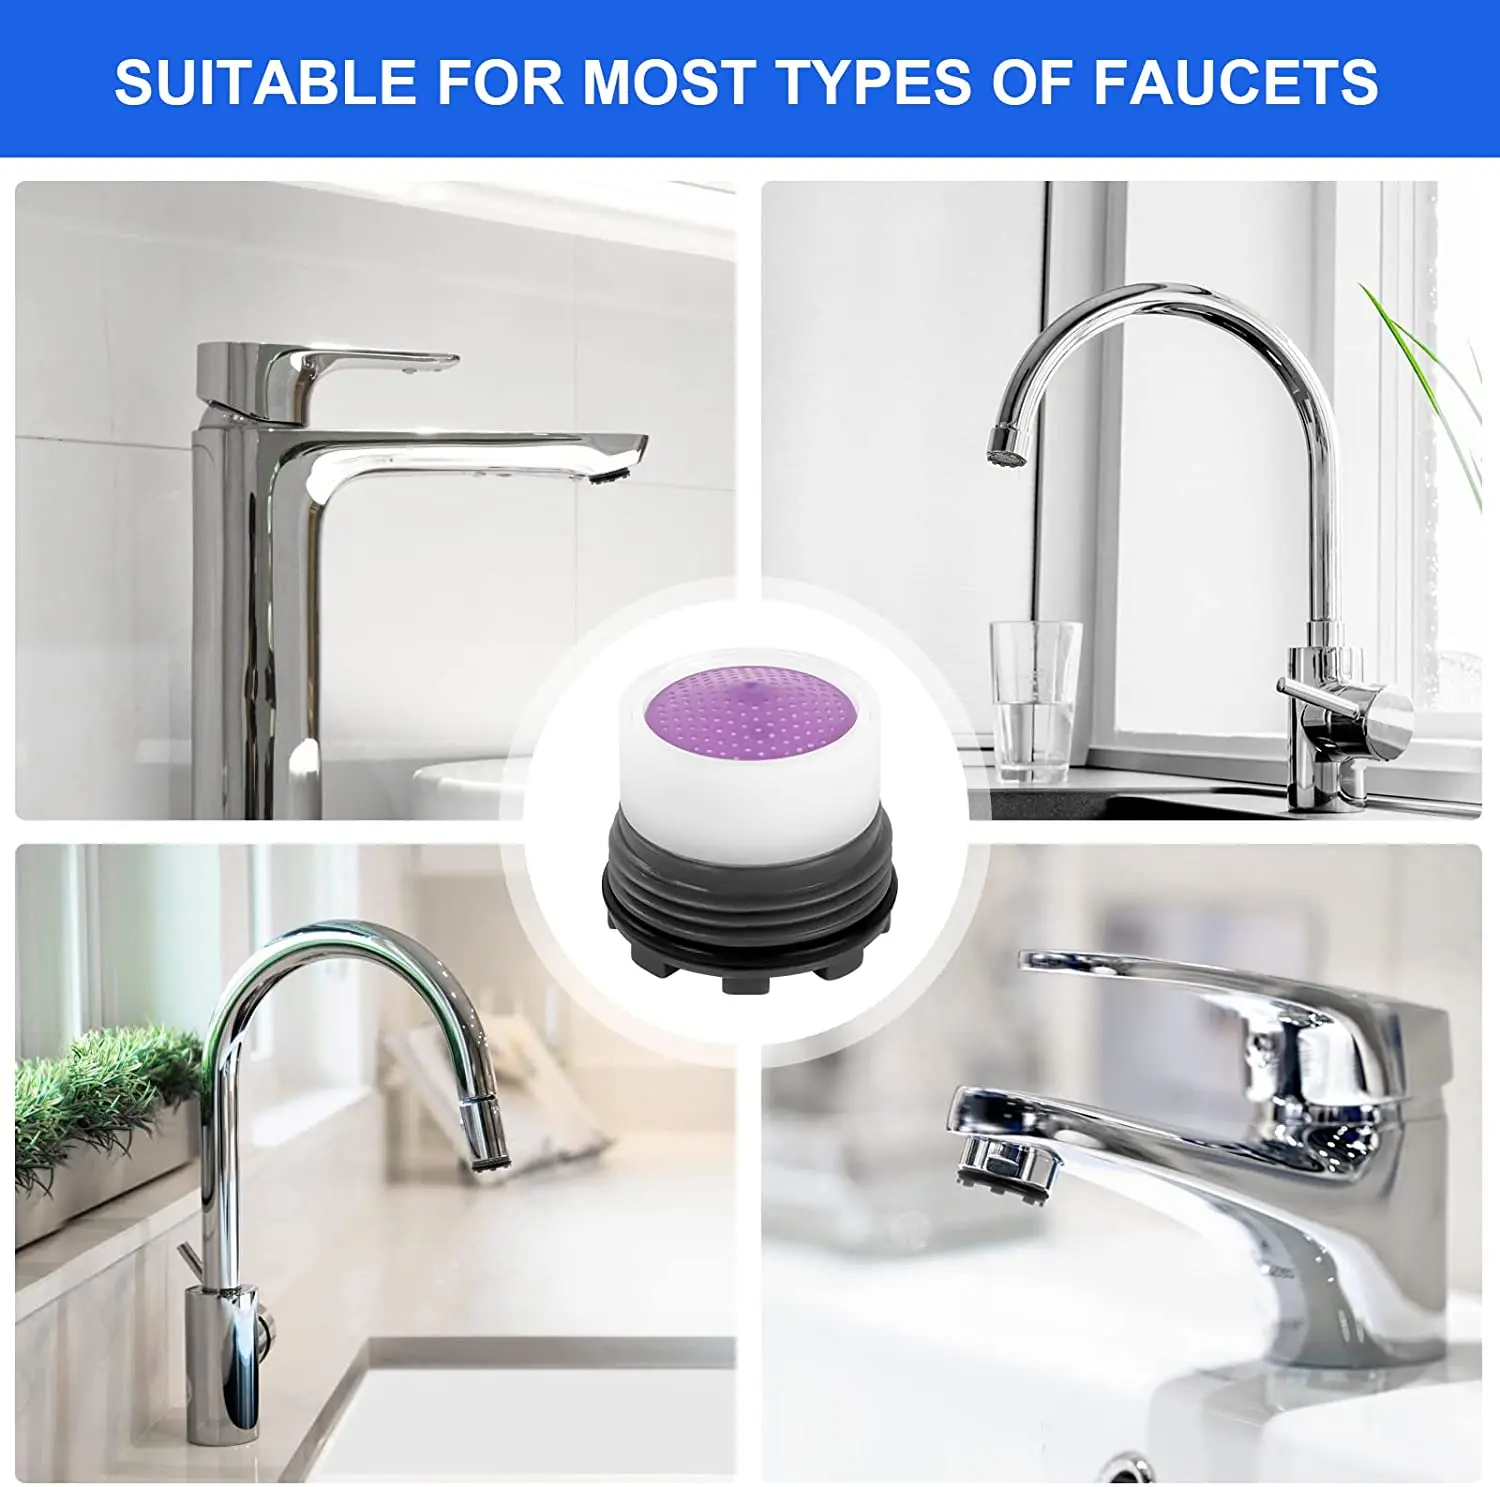 8 PCS Aerators Faucet，M16 Environmental Faucet Aerator with Removal Wrench Tool，High-Speed Water Saving for Cache Aerator